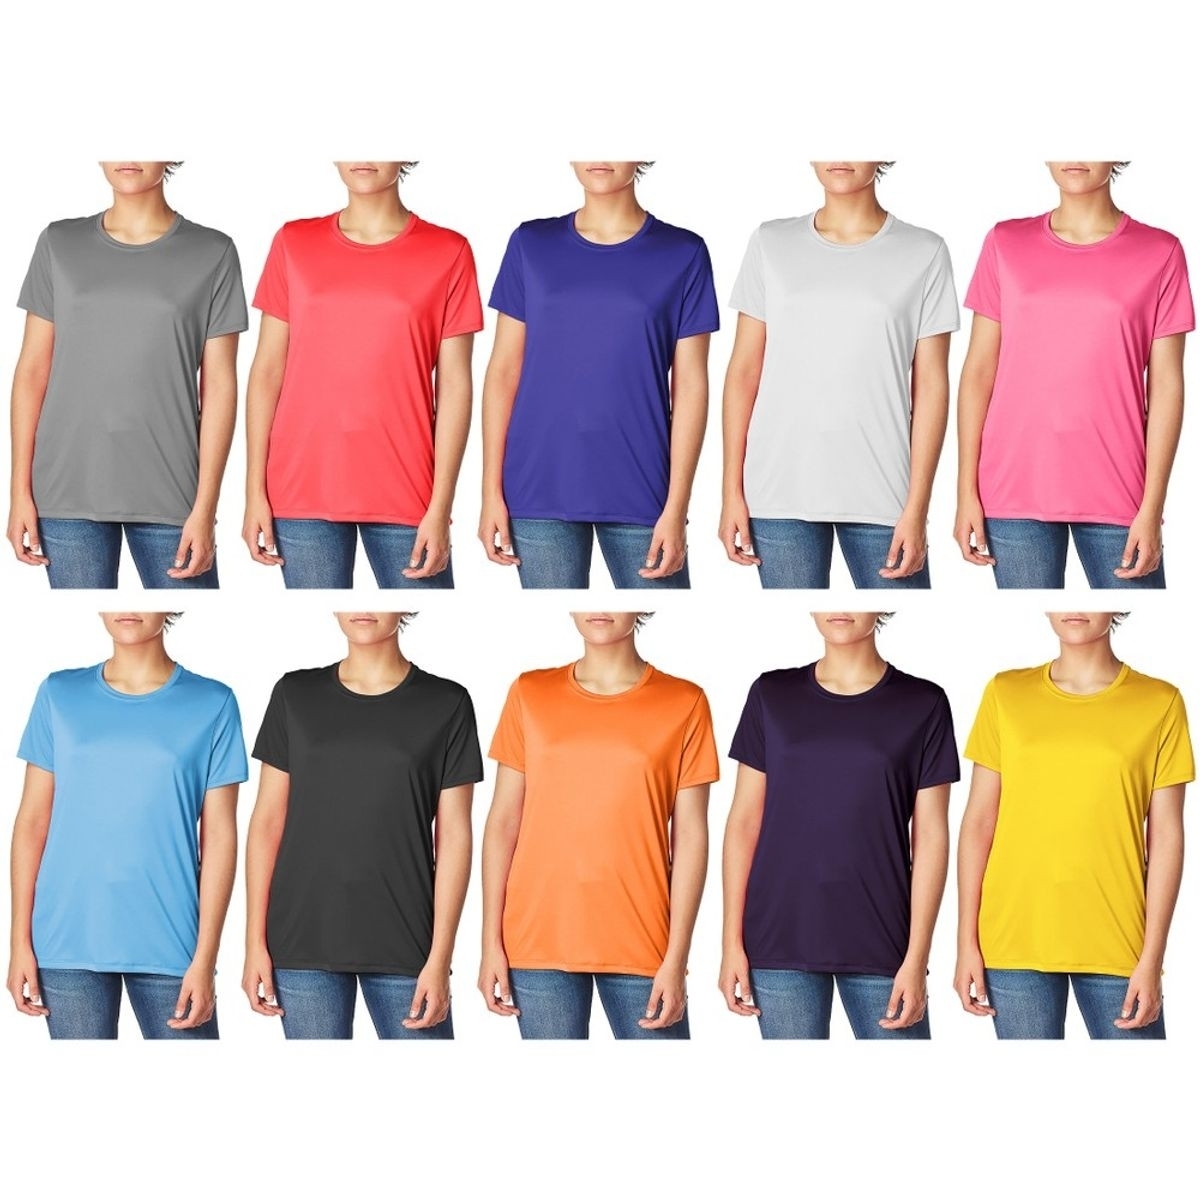 3-Pack: Women's Cool Dri-FIt Moisture Wicking Sim-Fit Long Sleeve Crew Neck T-Shirts - Large